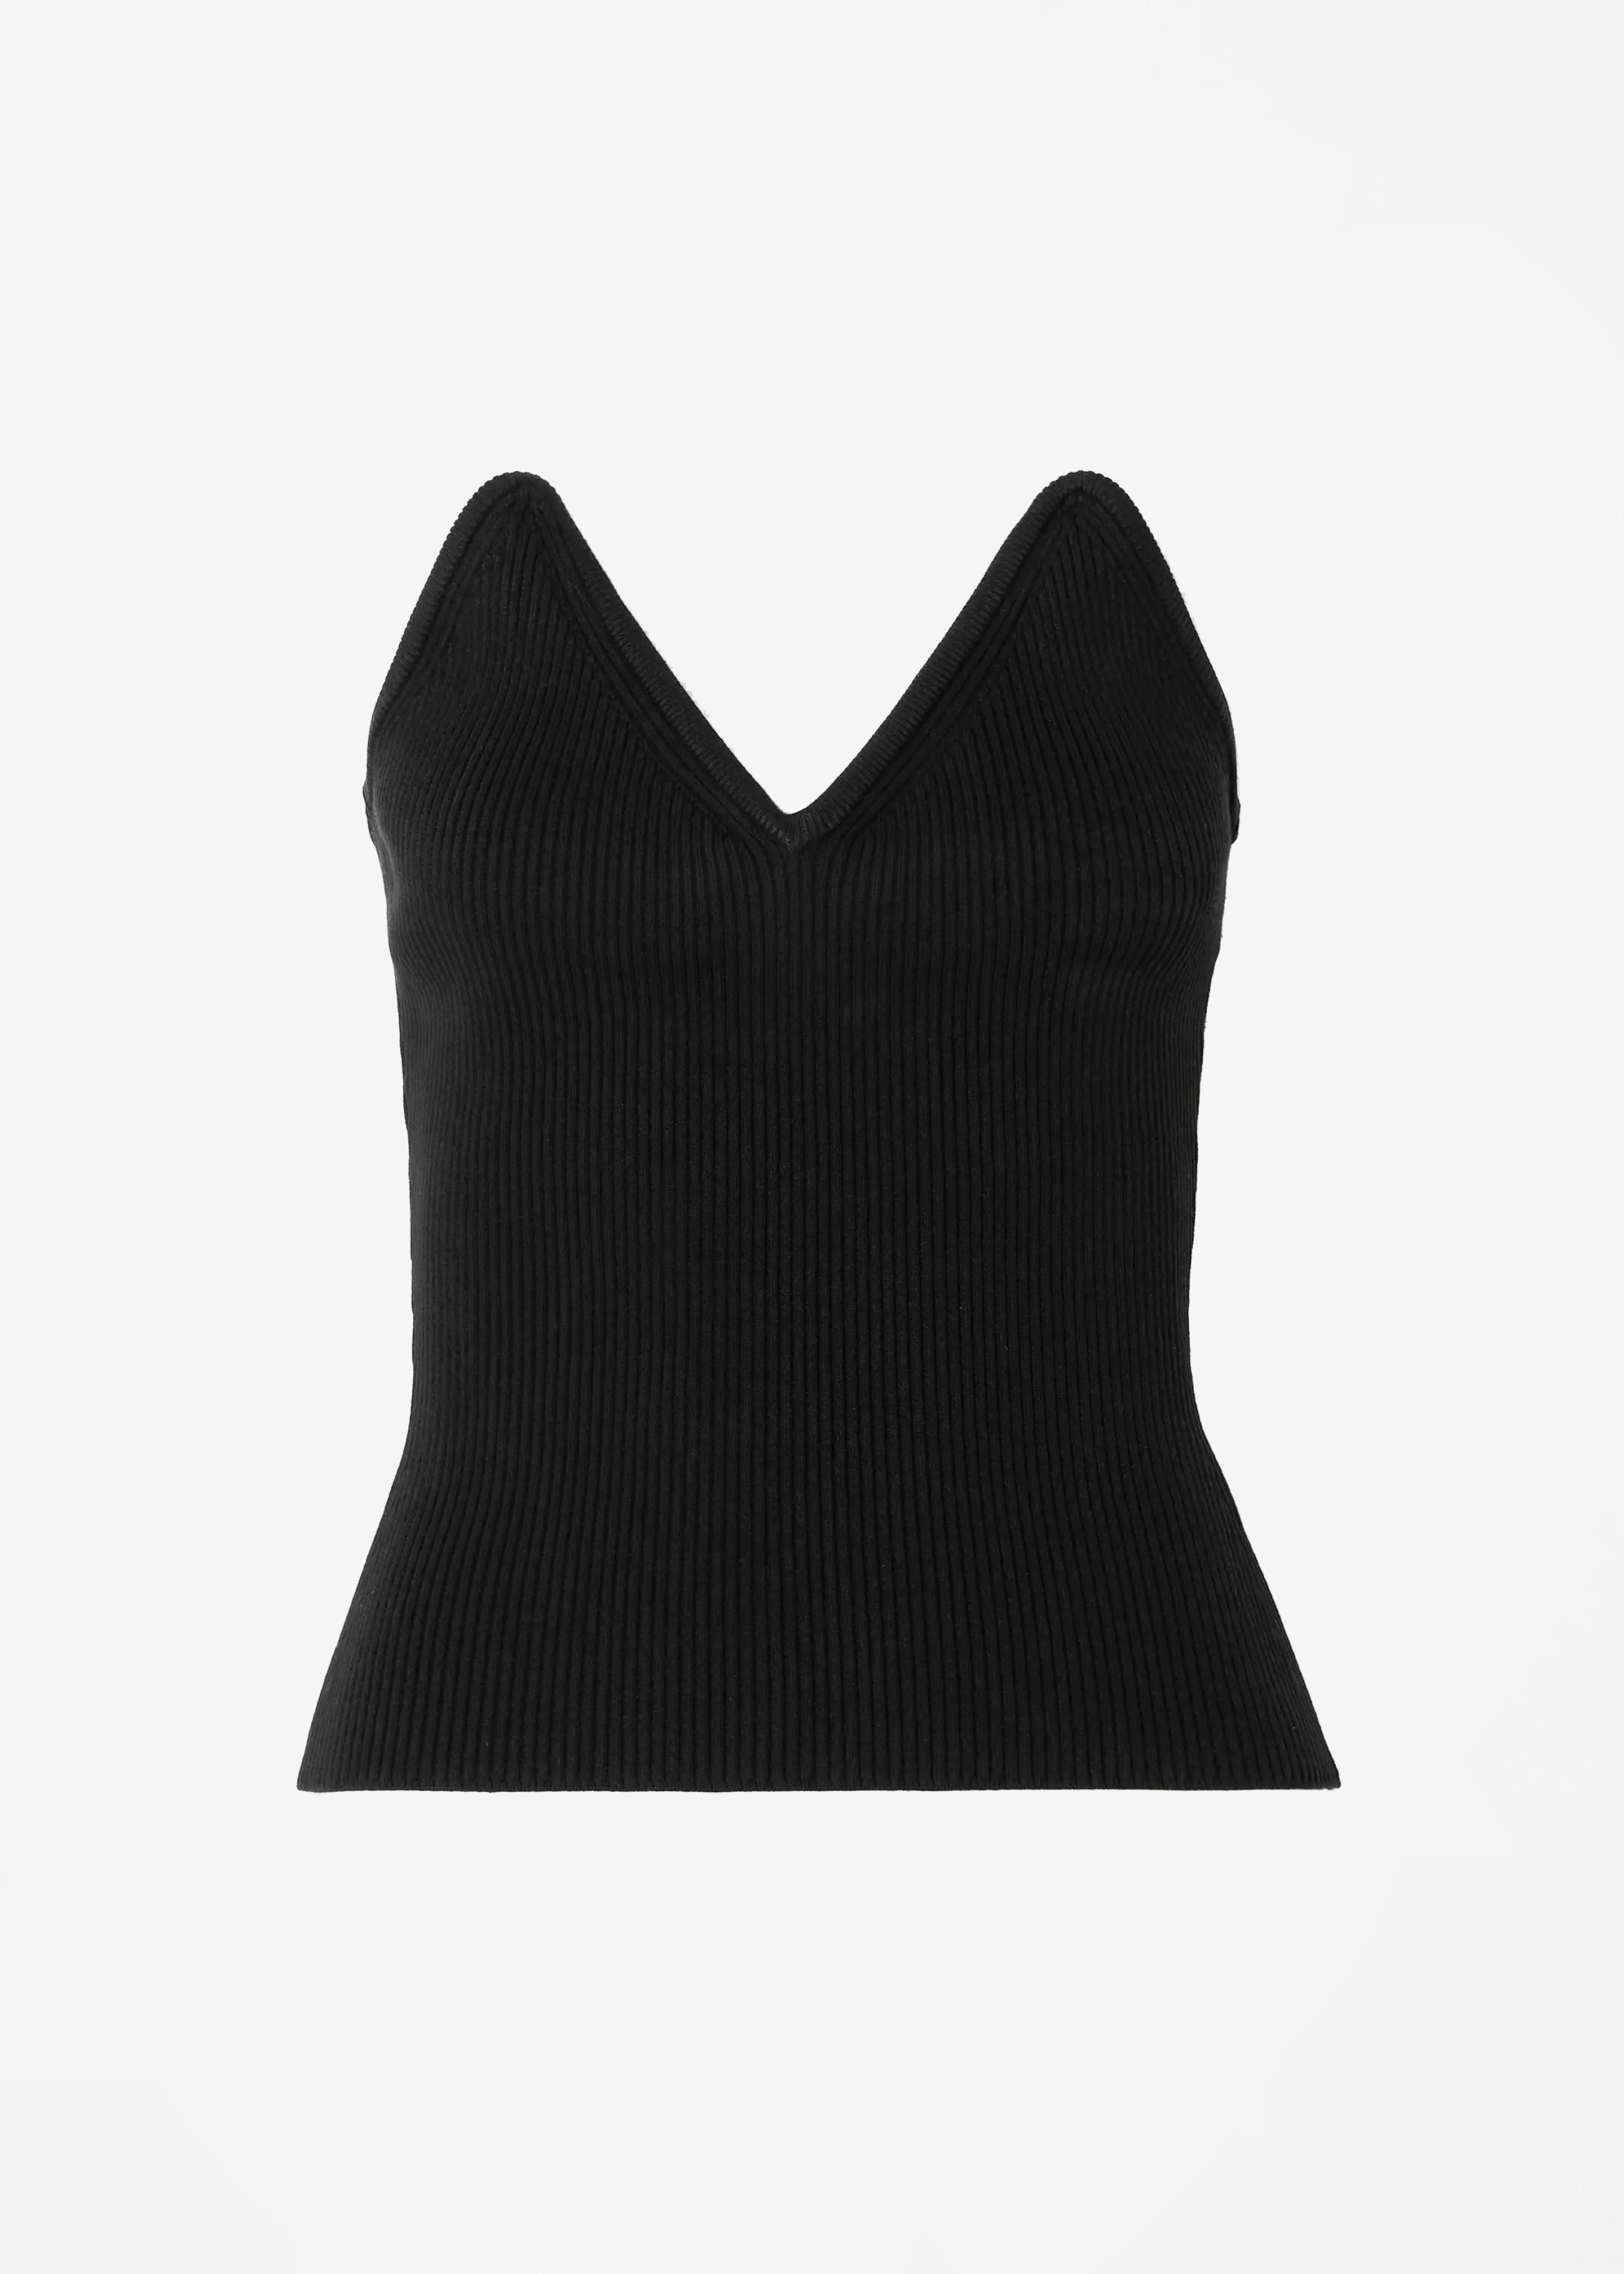 Coperni Knitted Bustier Top - Black - 7